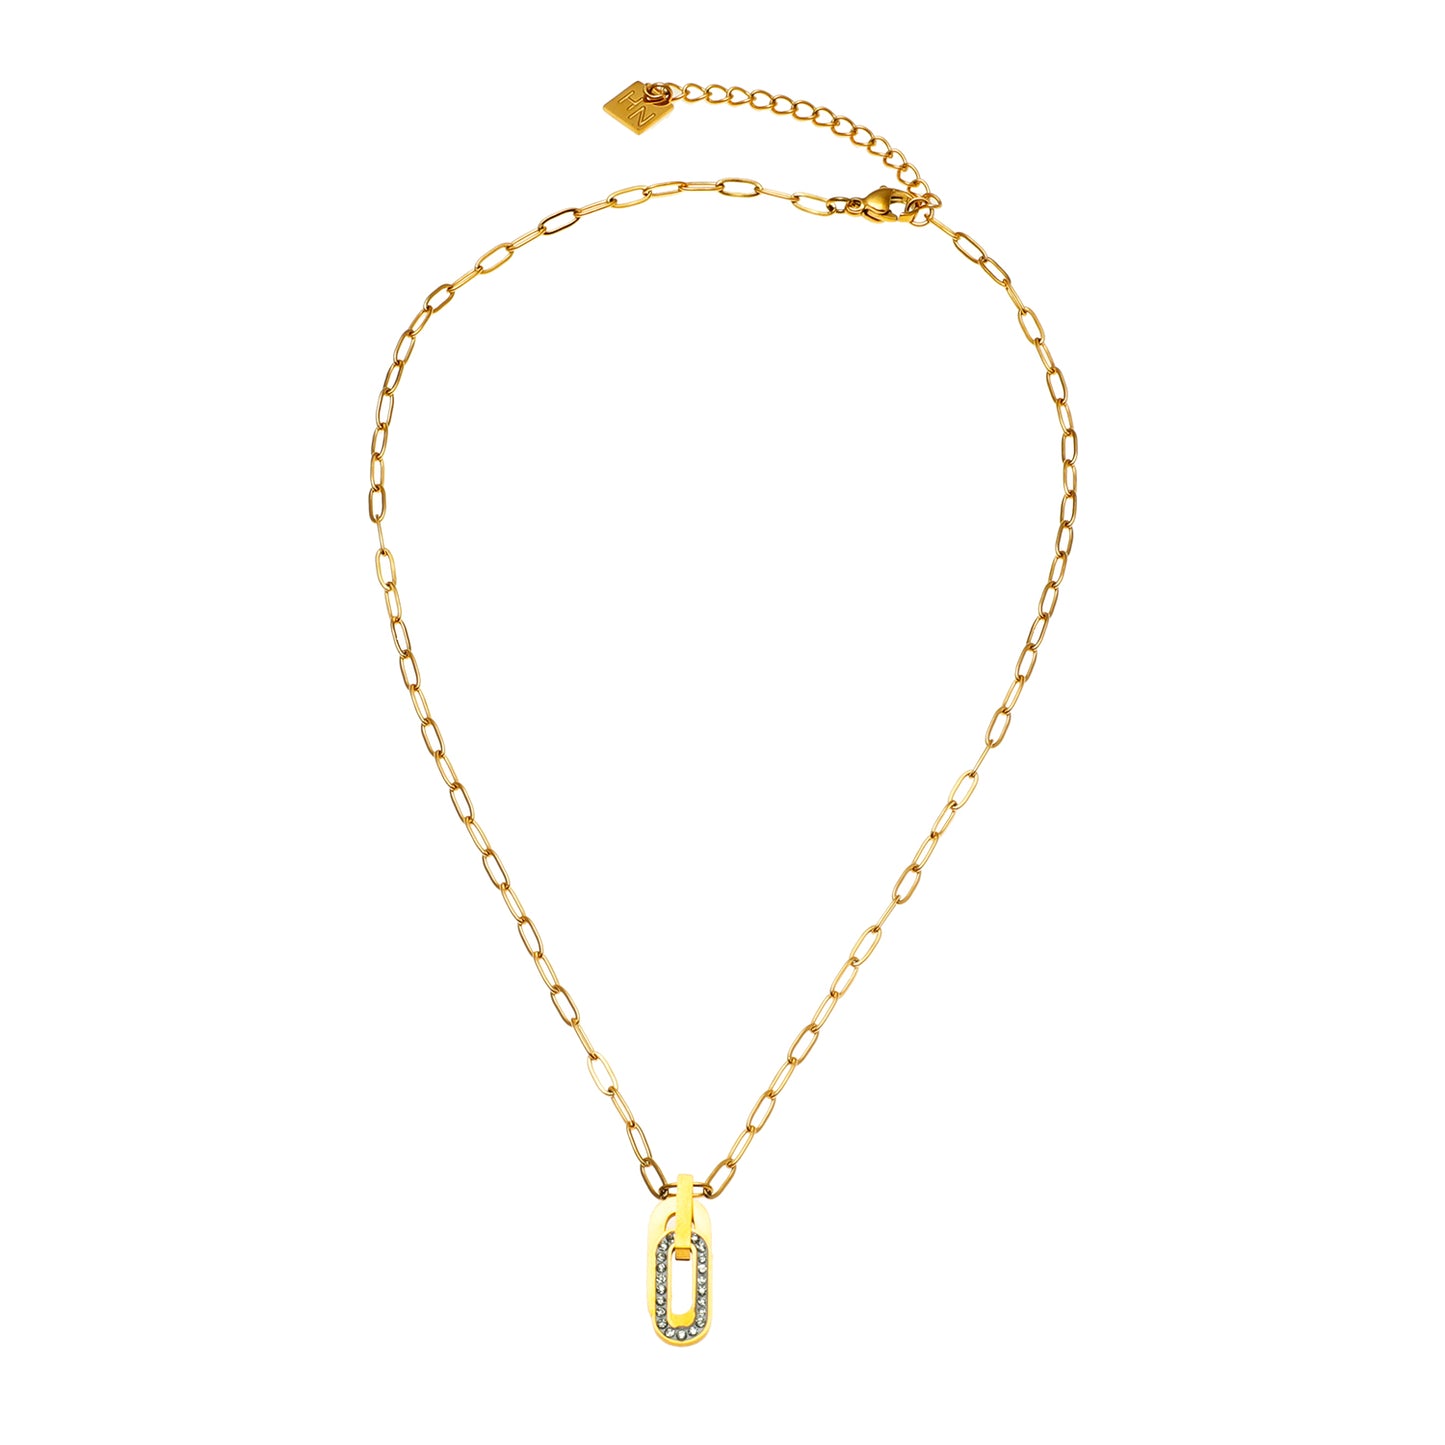 Style CHICALA 33164: Zirconia-Embedded Oval Shaped Charms Pendant on Paper-Clip Chain Necklace.